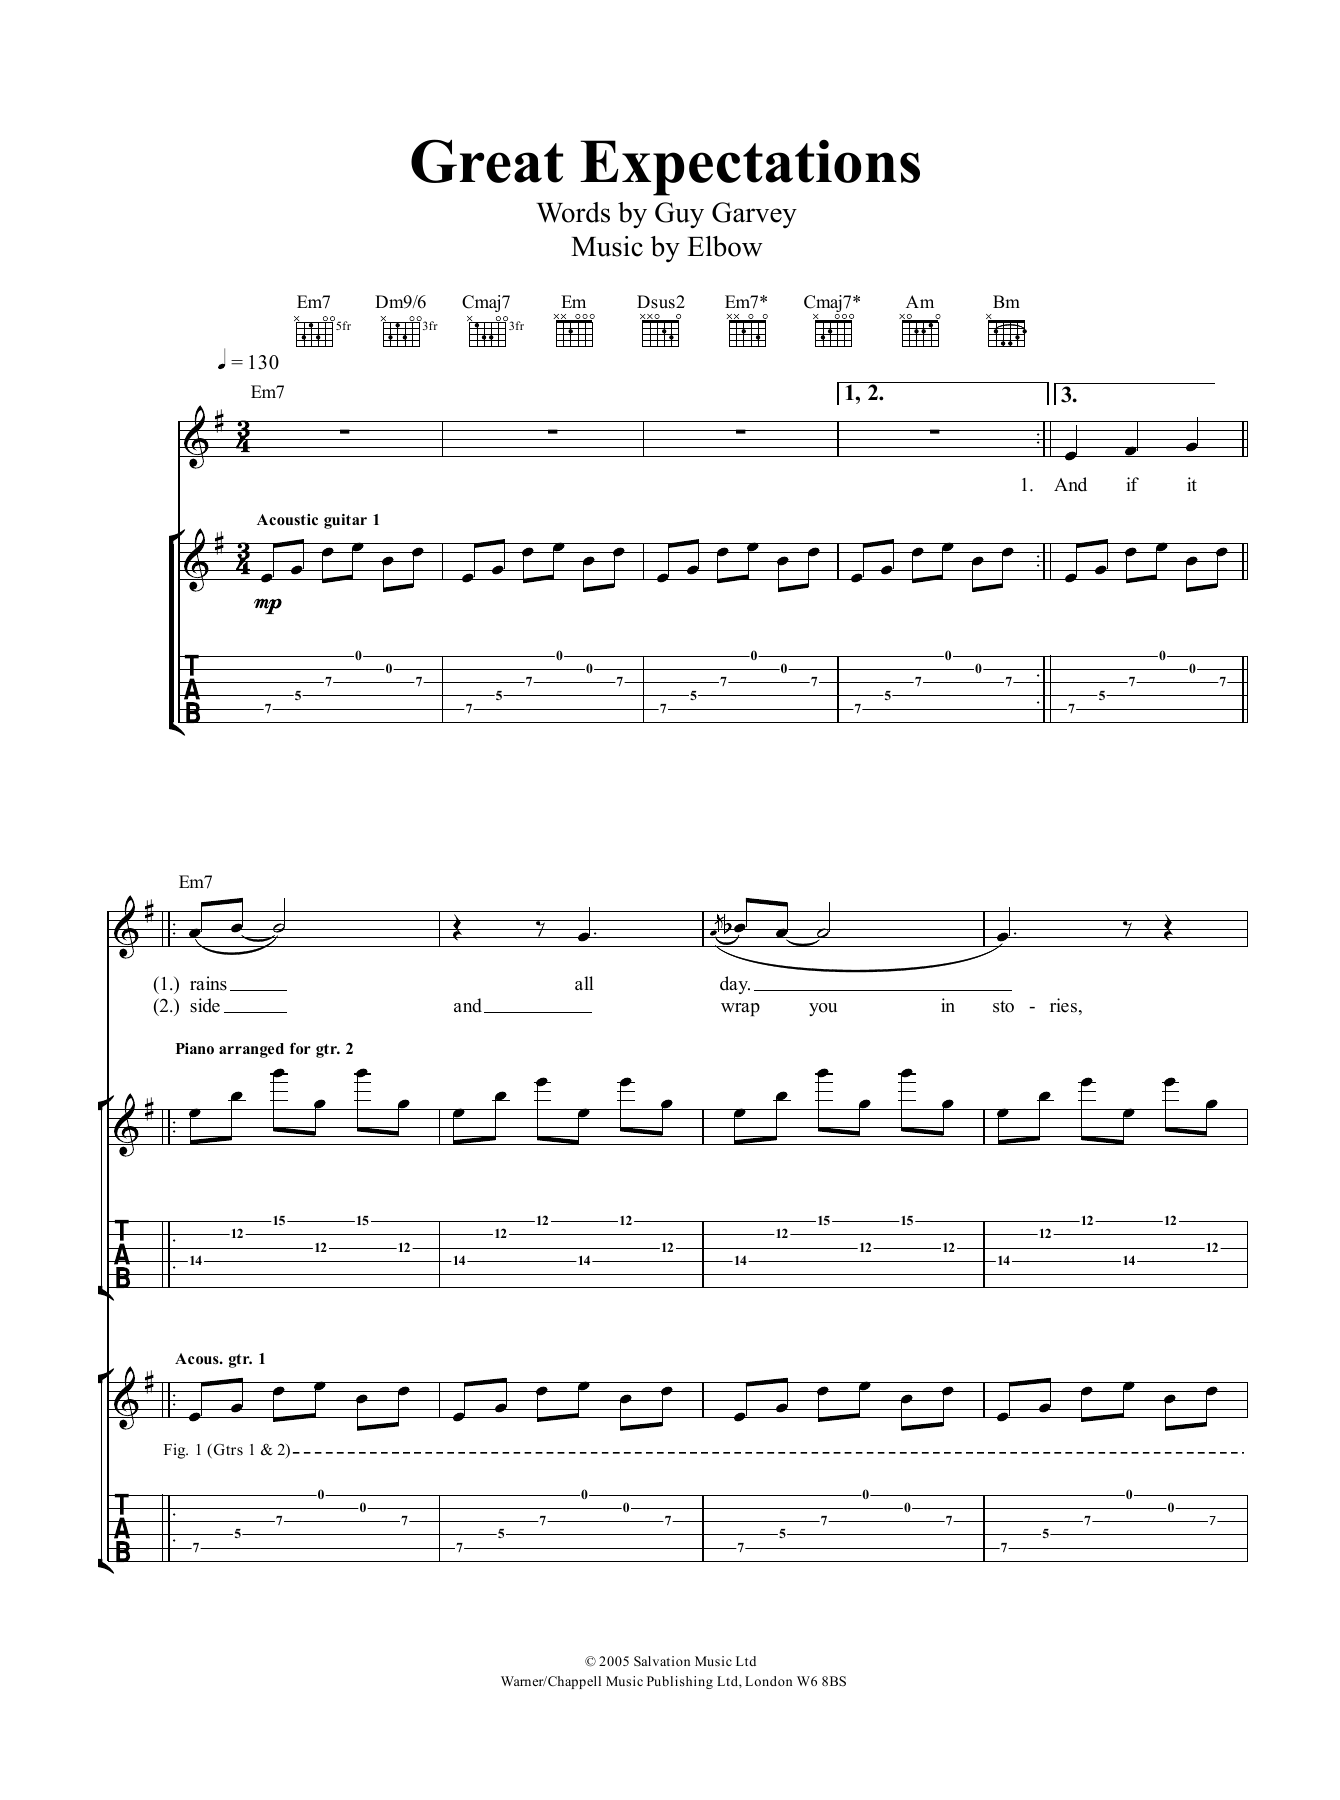 Download Elbow Great Expectations Sheet Music